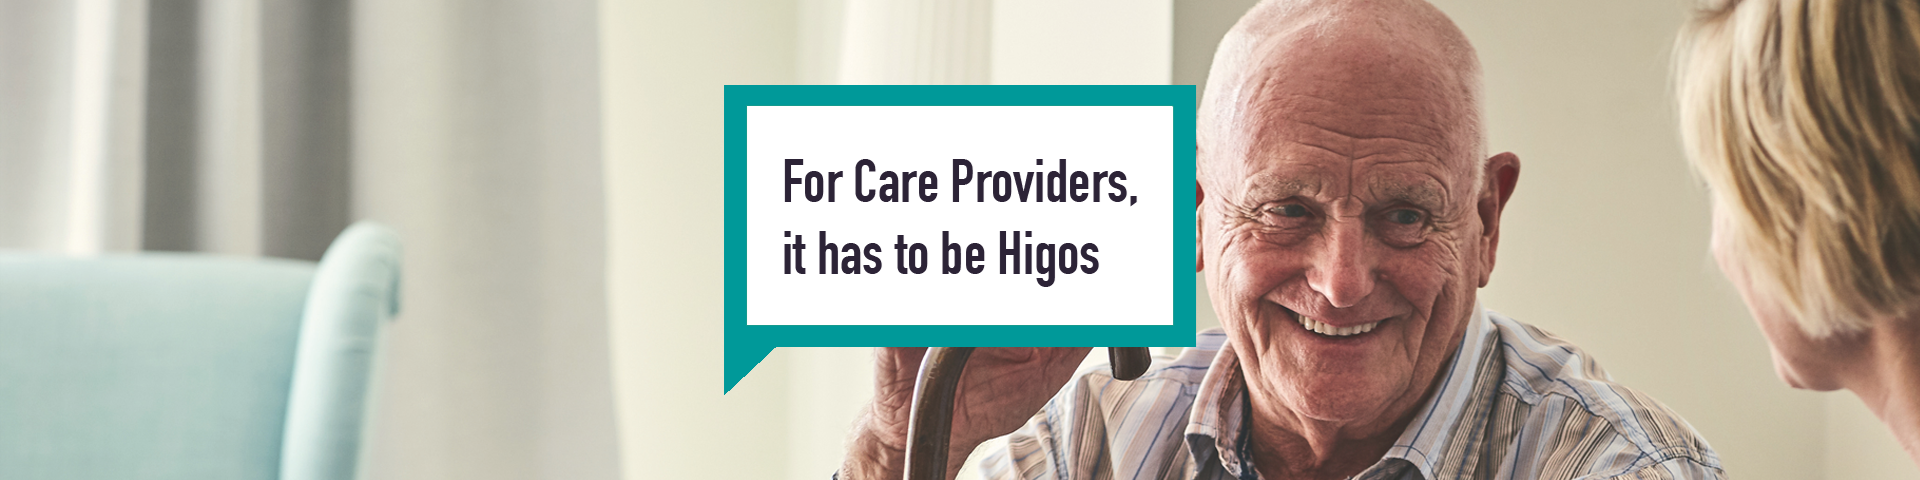 Higos business insurance care providers